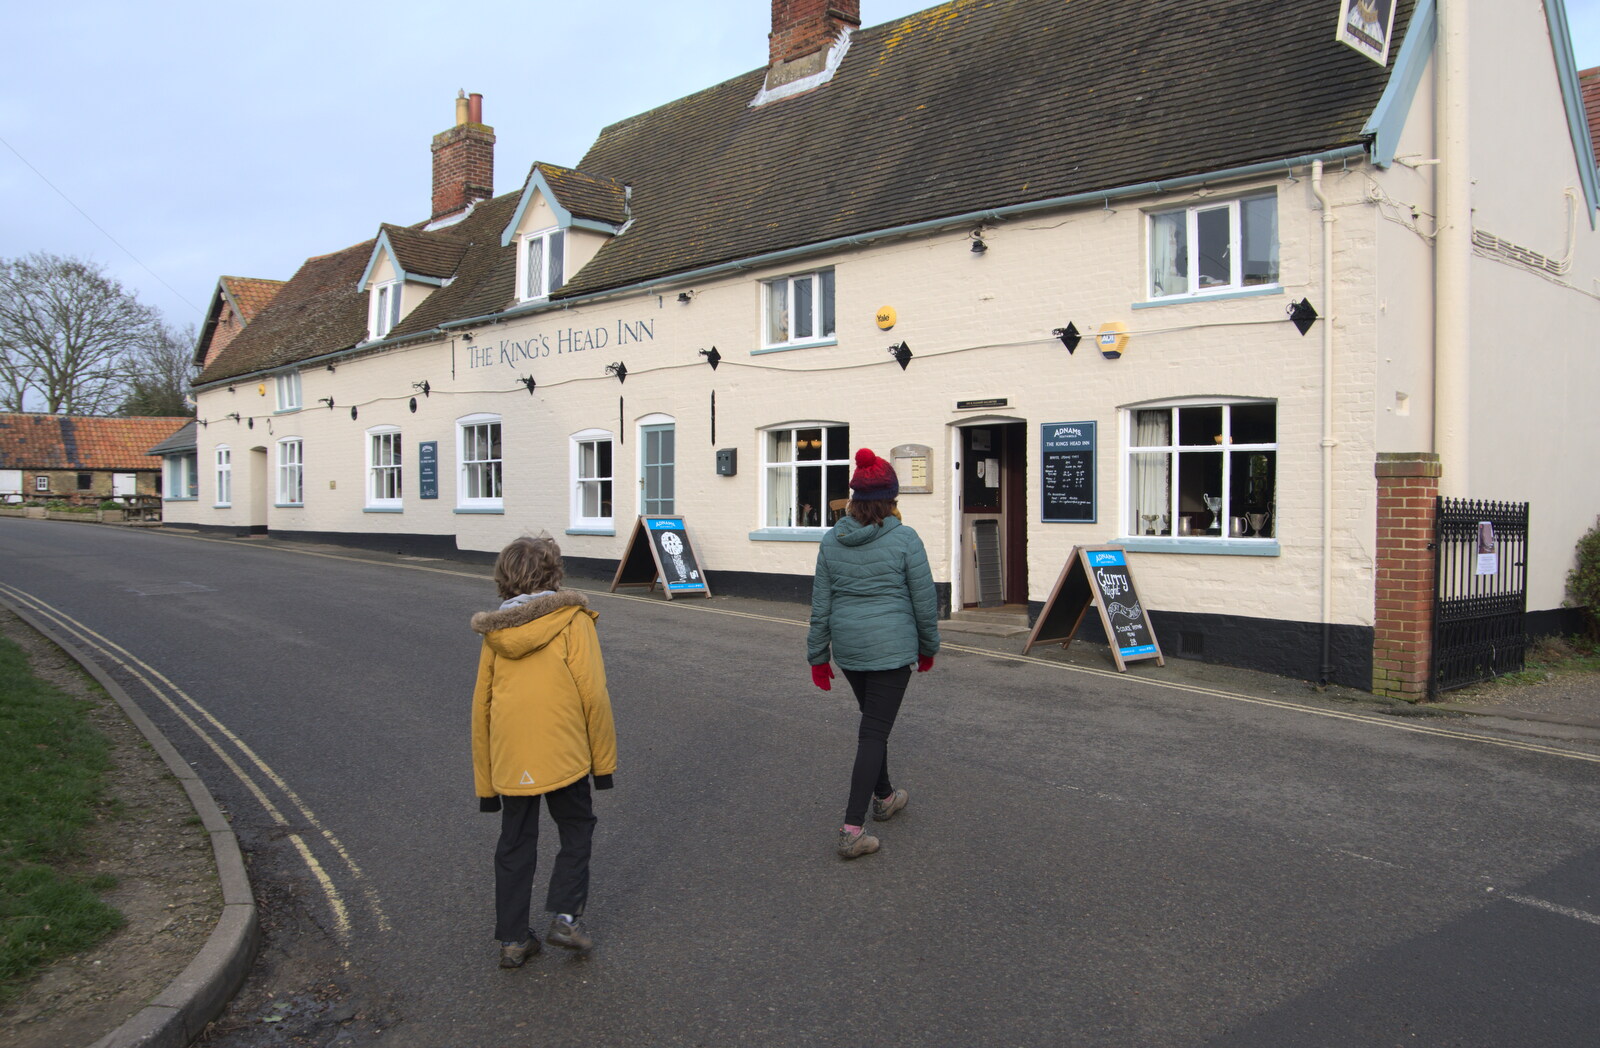 A Trip to Orford, Suffolk - 25th January 2020: We head over to the King's Head